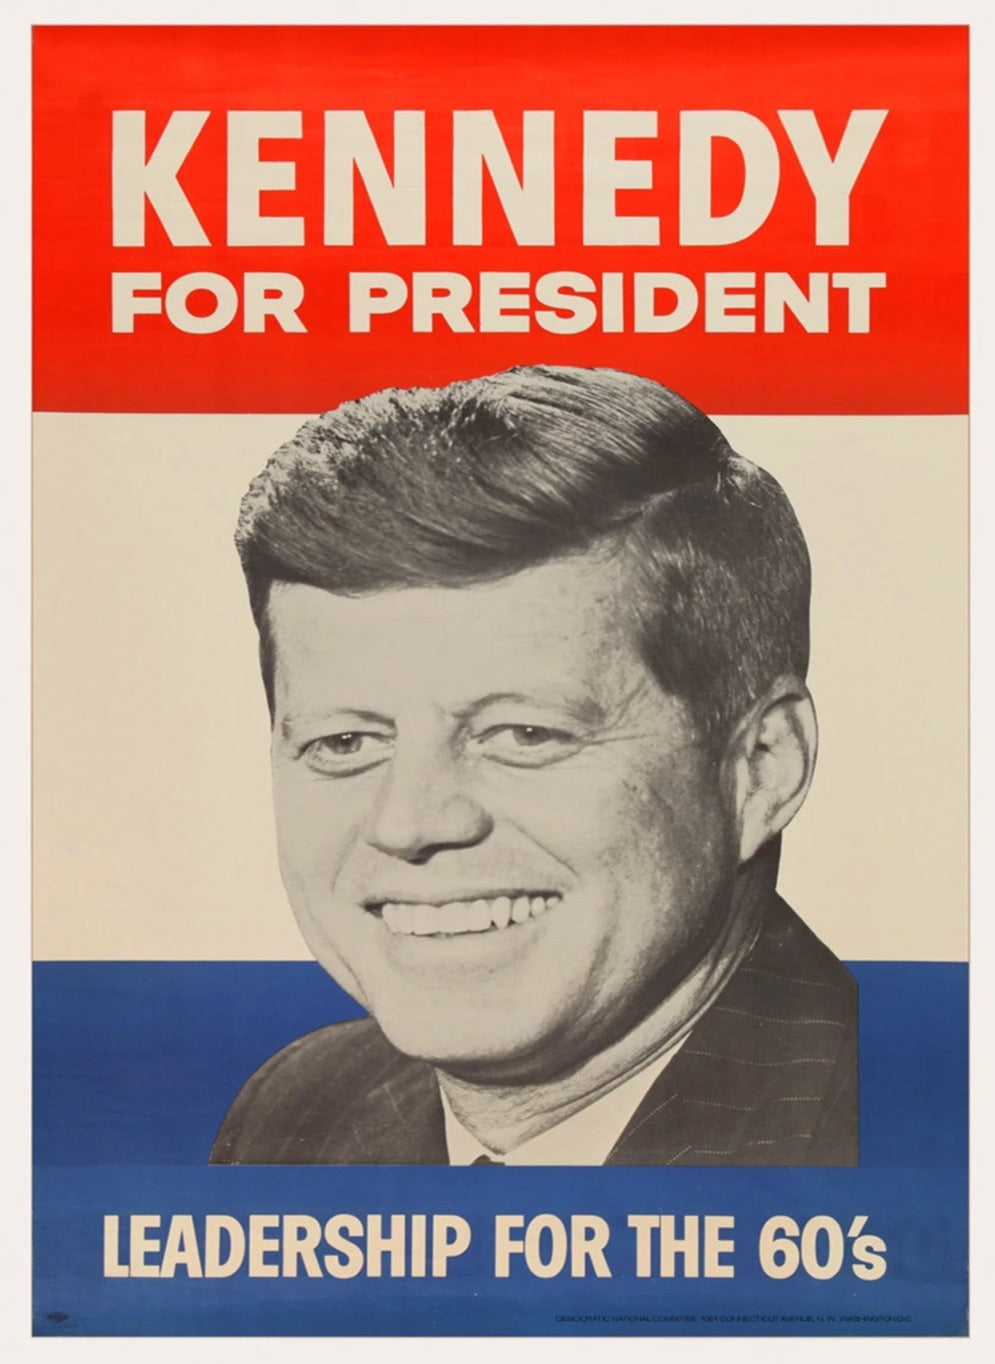 Kennedy for President - Leadership for the 60's